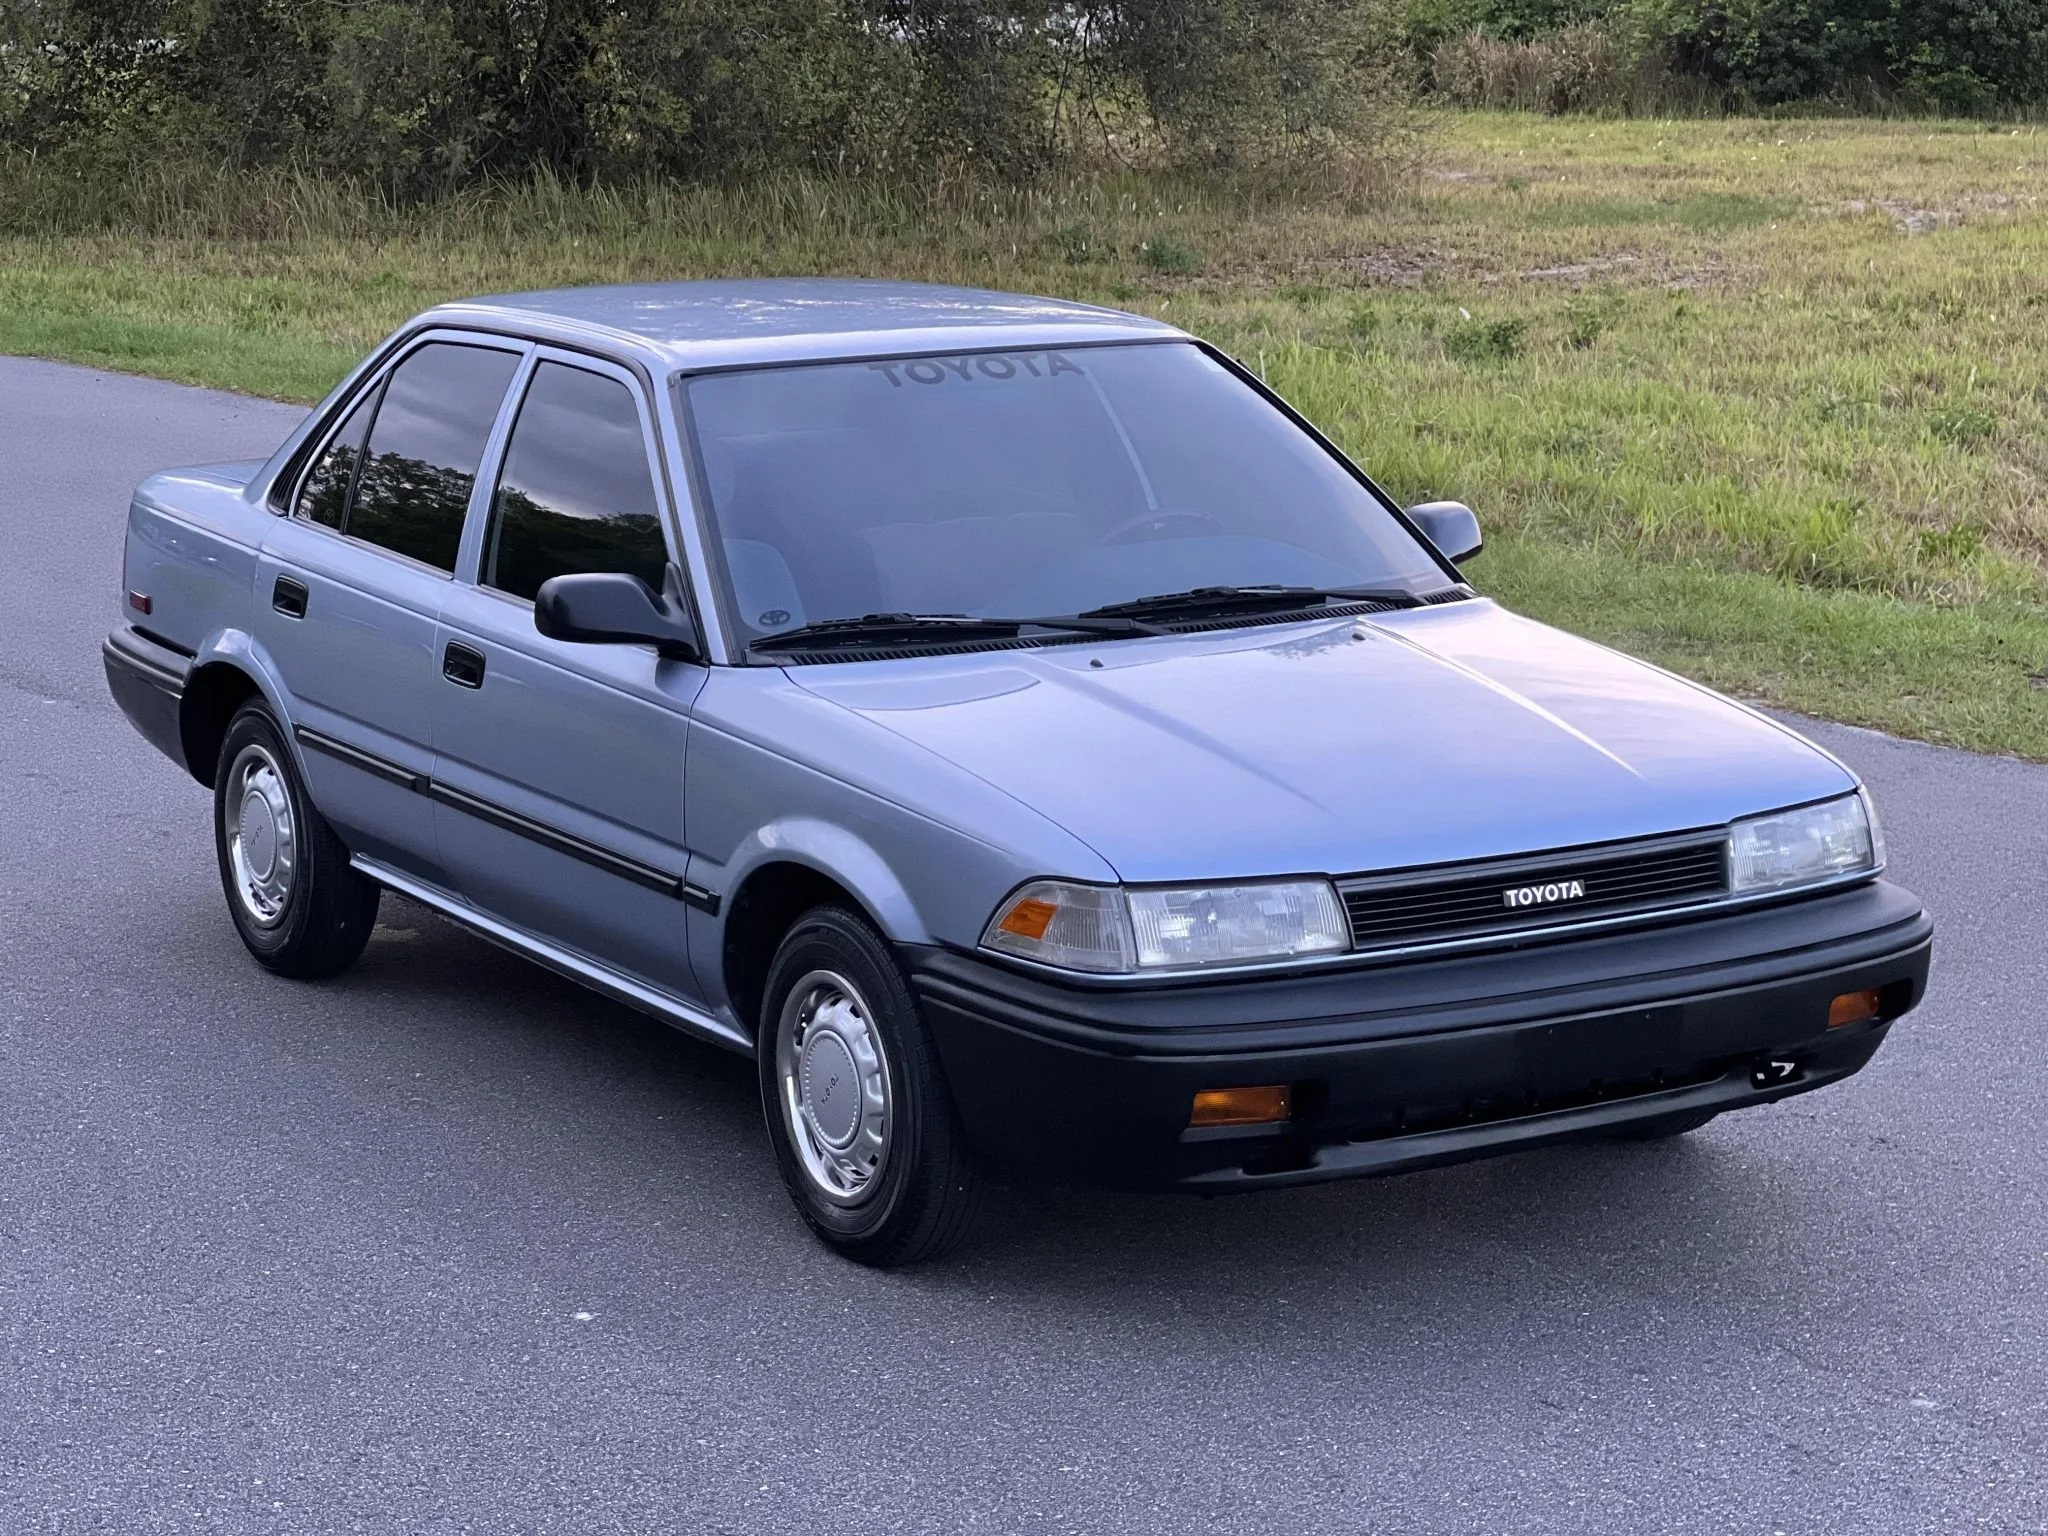 1988 Toyota Corolla Sells for $17,000 With No Reserve, the Buyer ...